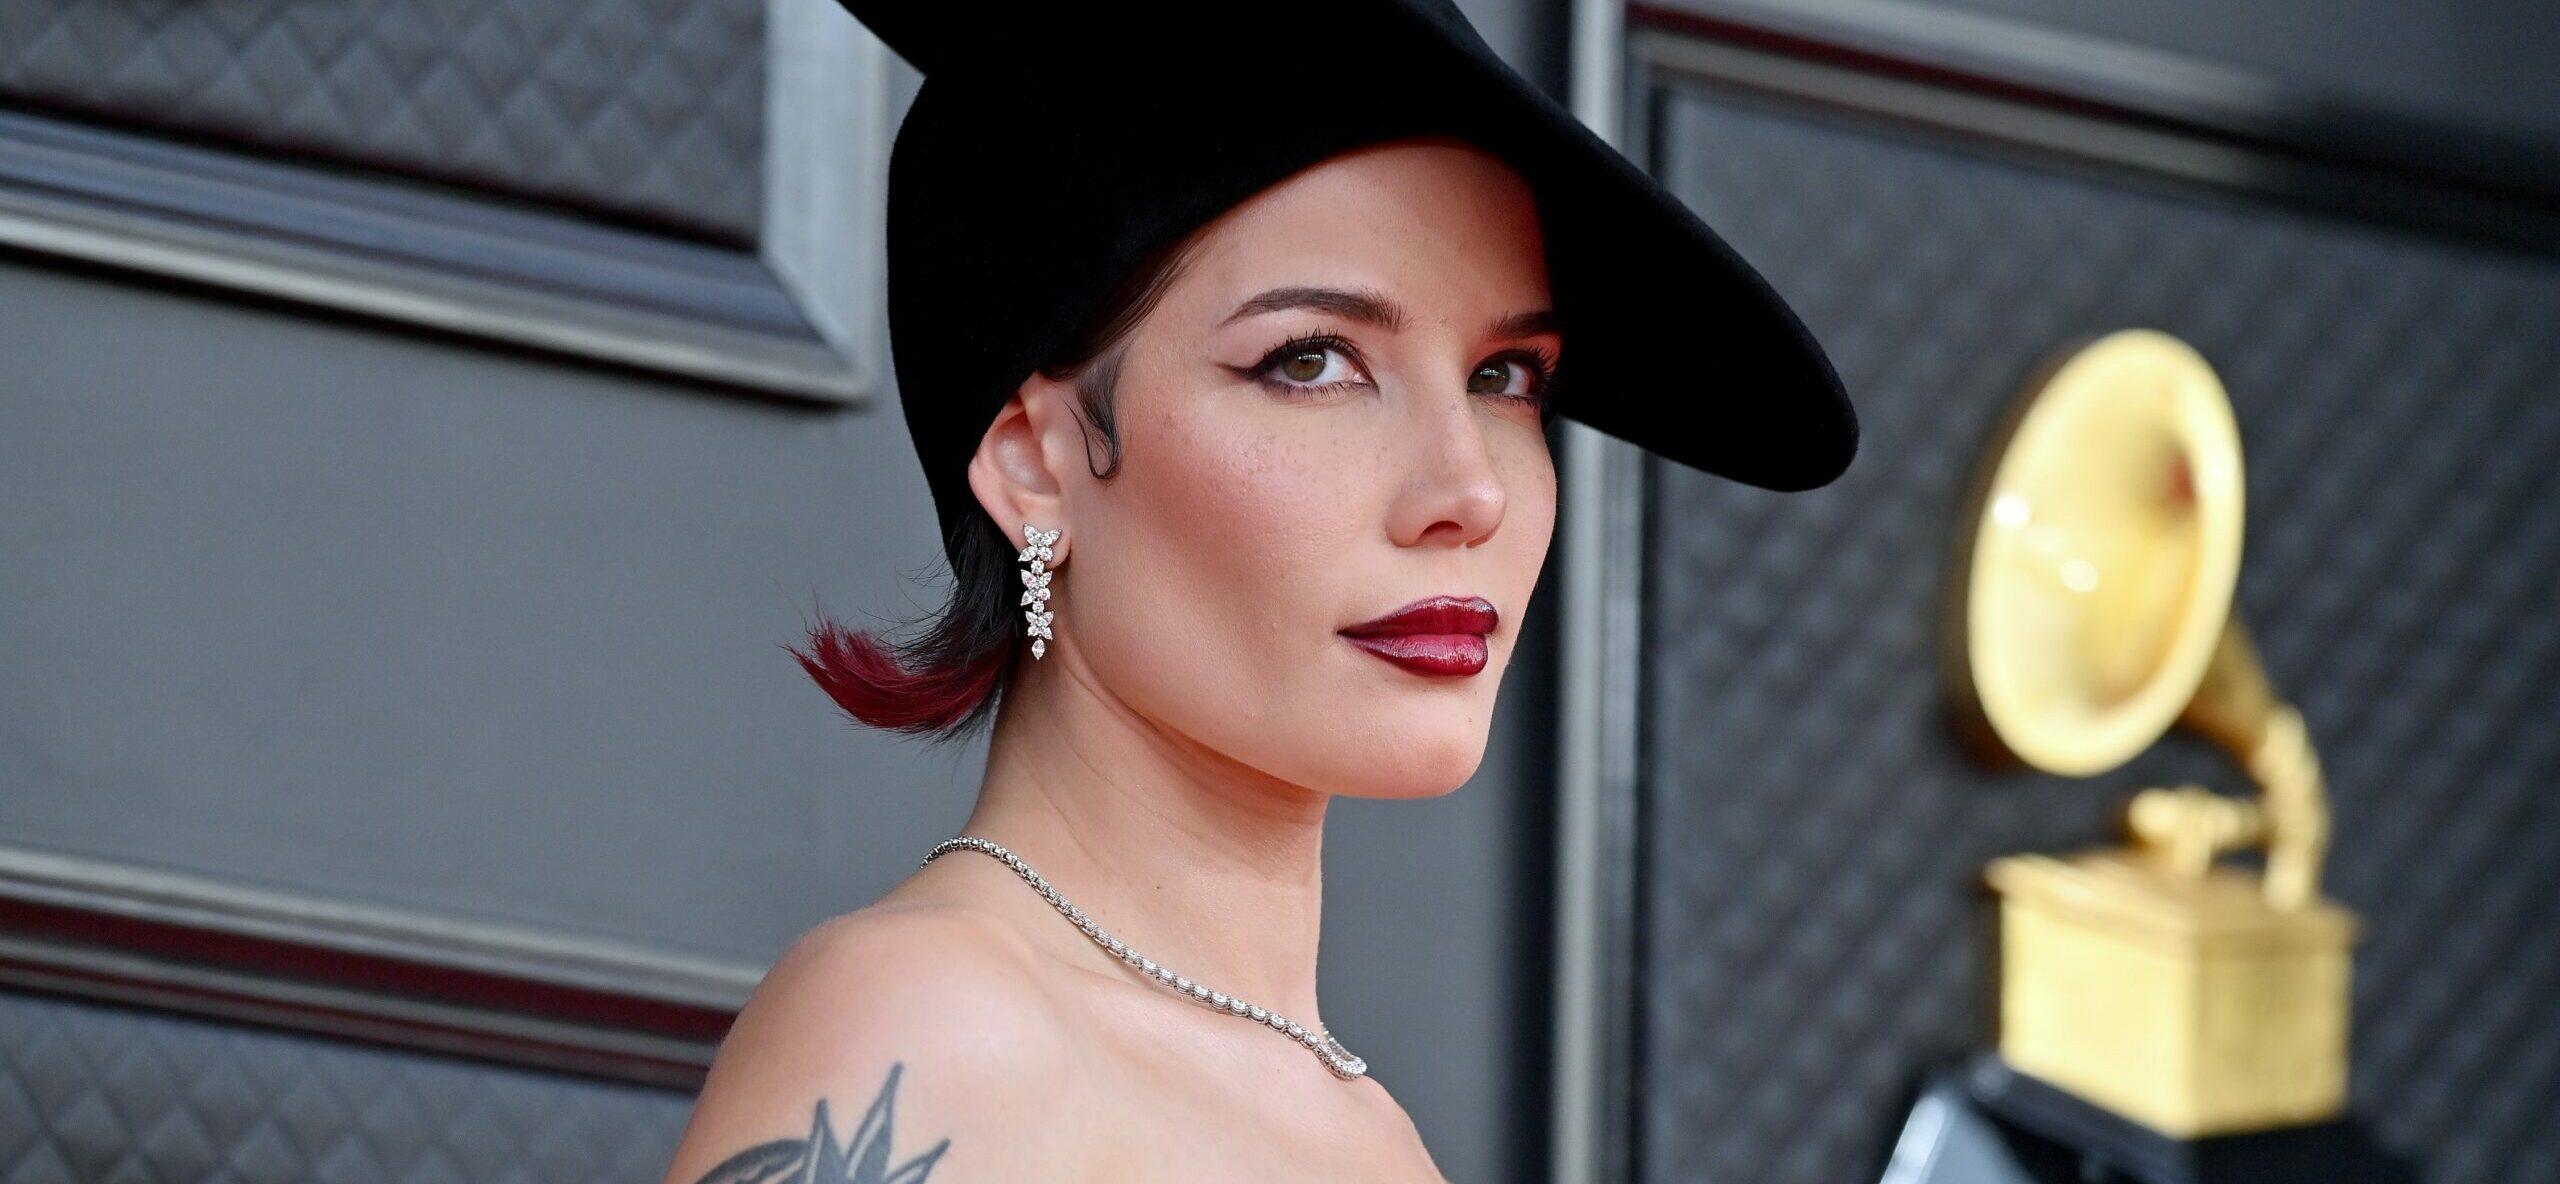 Halsey Finds A New Home With Columbia Records Months After Leaving Capitol Records